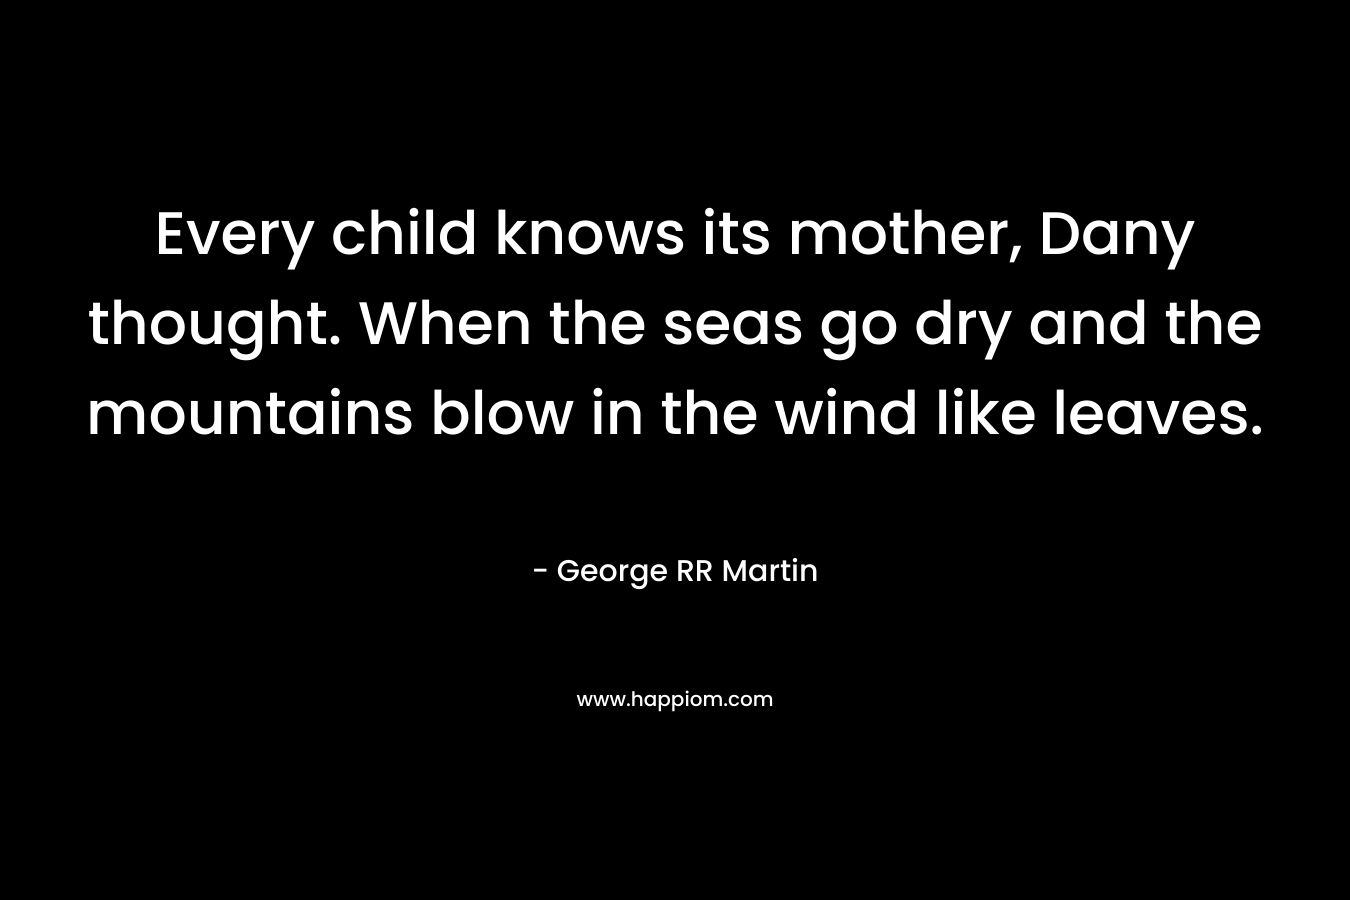 Every child knows its mother, Dany thought. When the seas go dry and the mountains blow in the wind like leaves. – George RR Martin